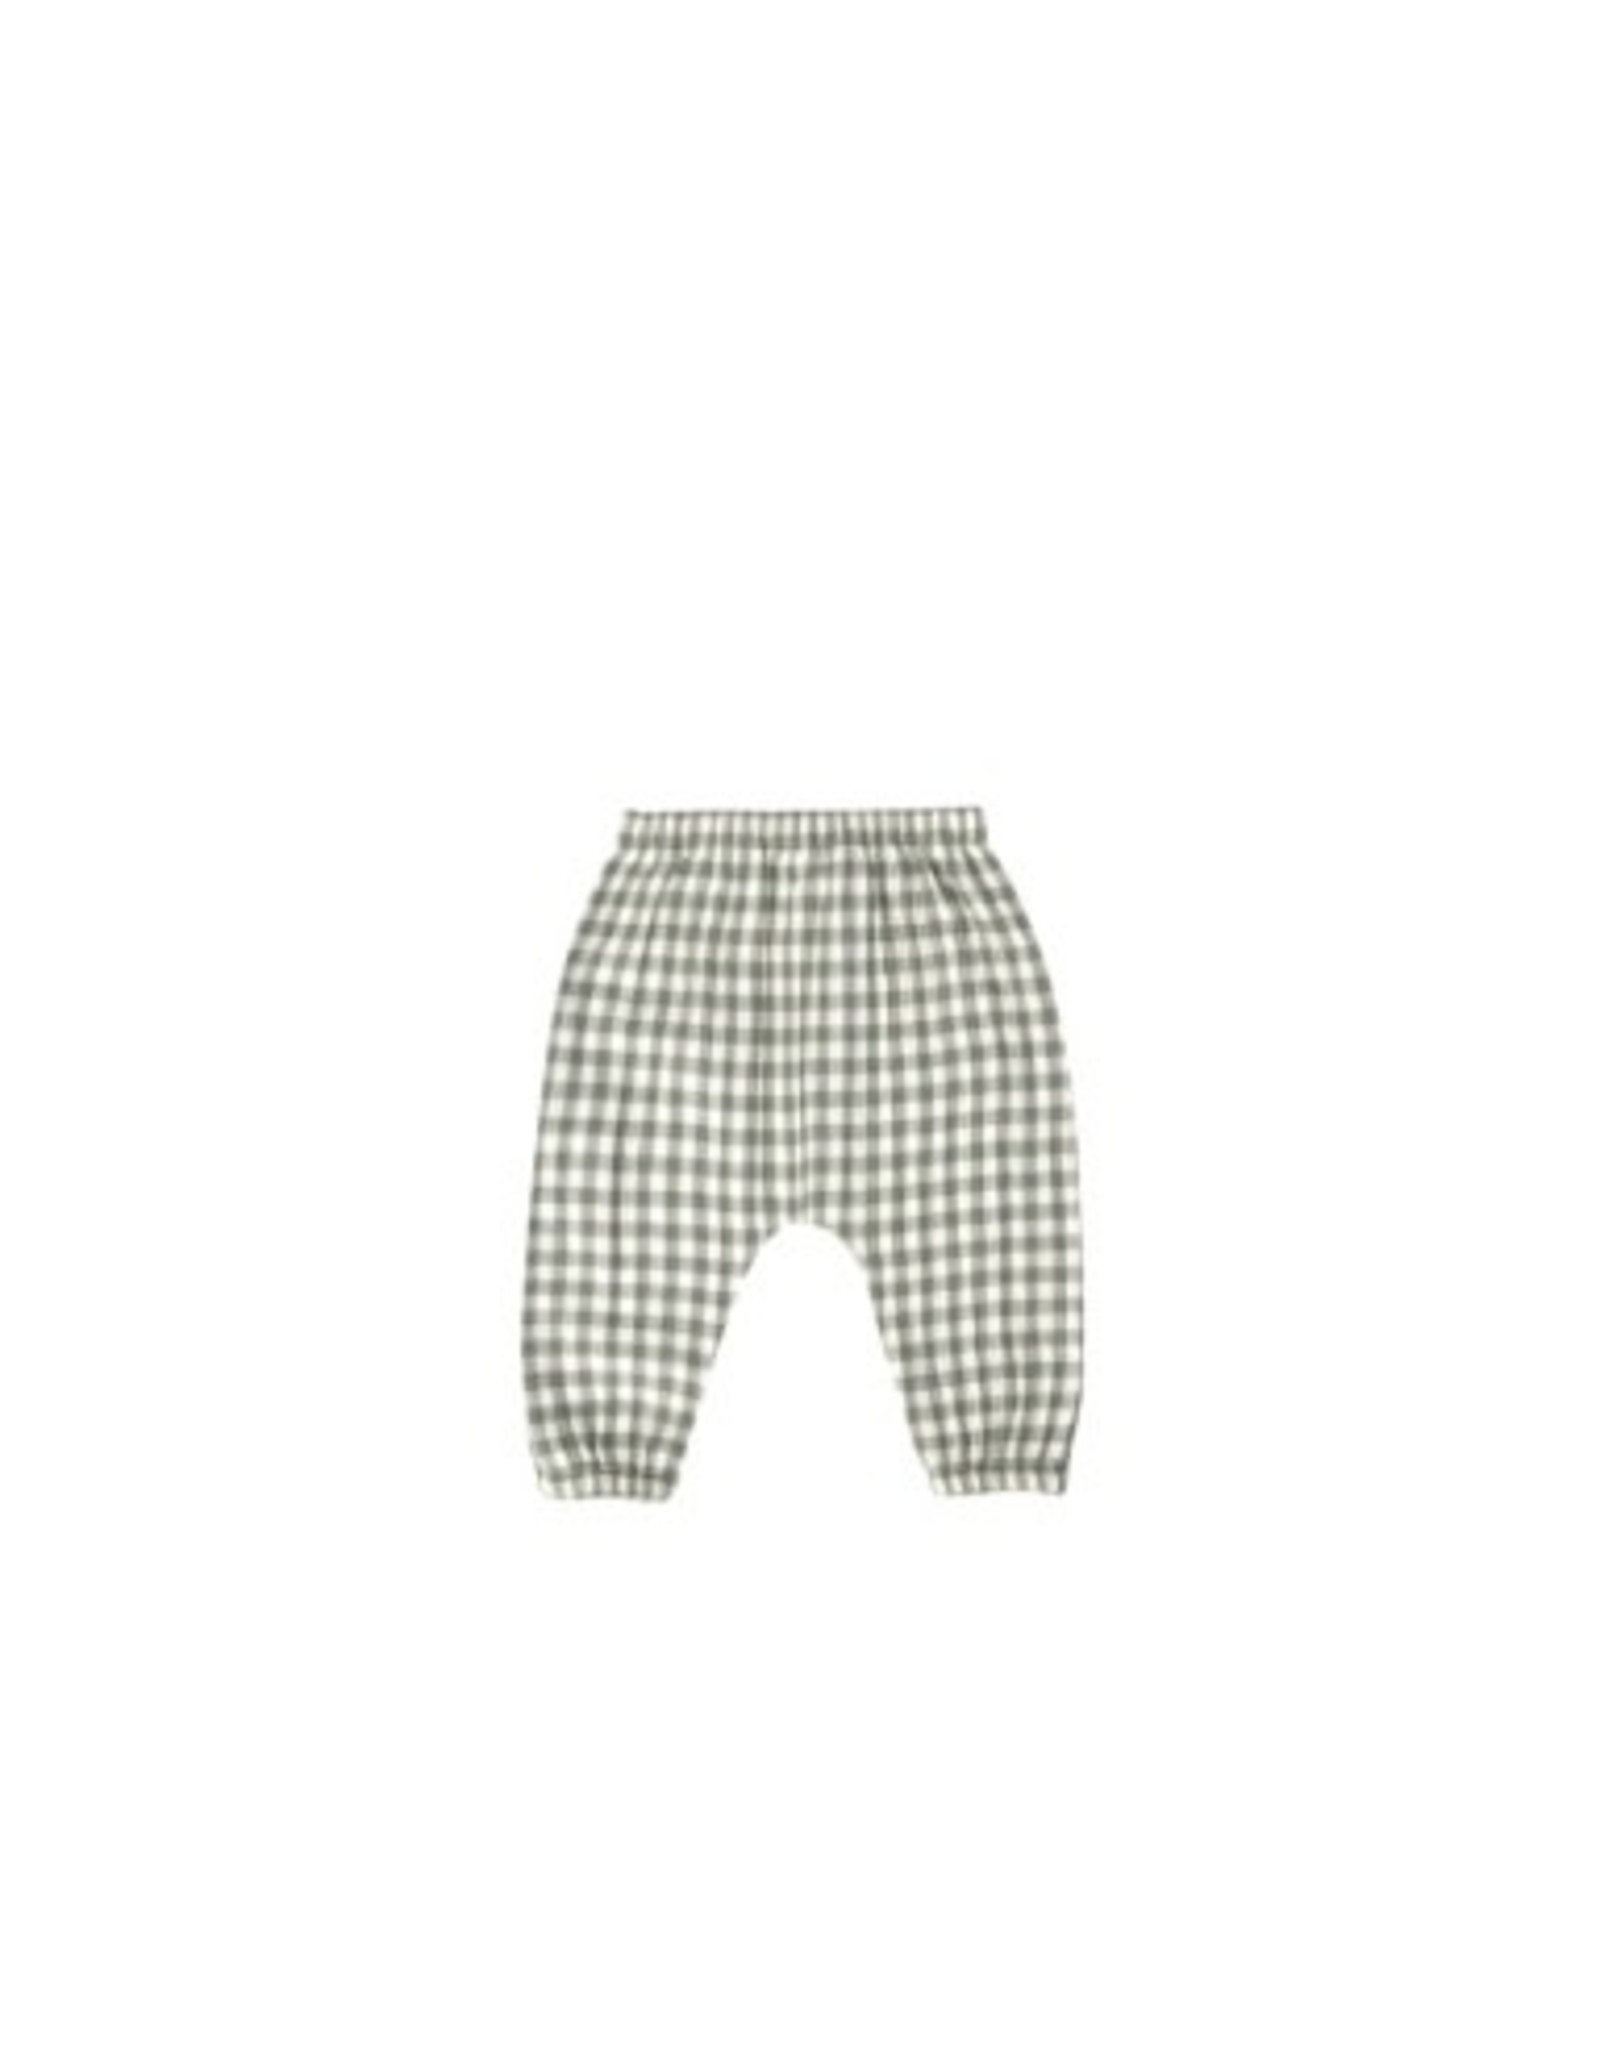 Quincy Mae WOVEN PANT | SEA GREEN GINGHAM